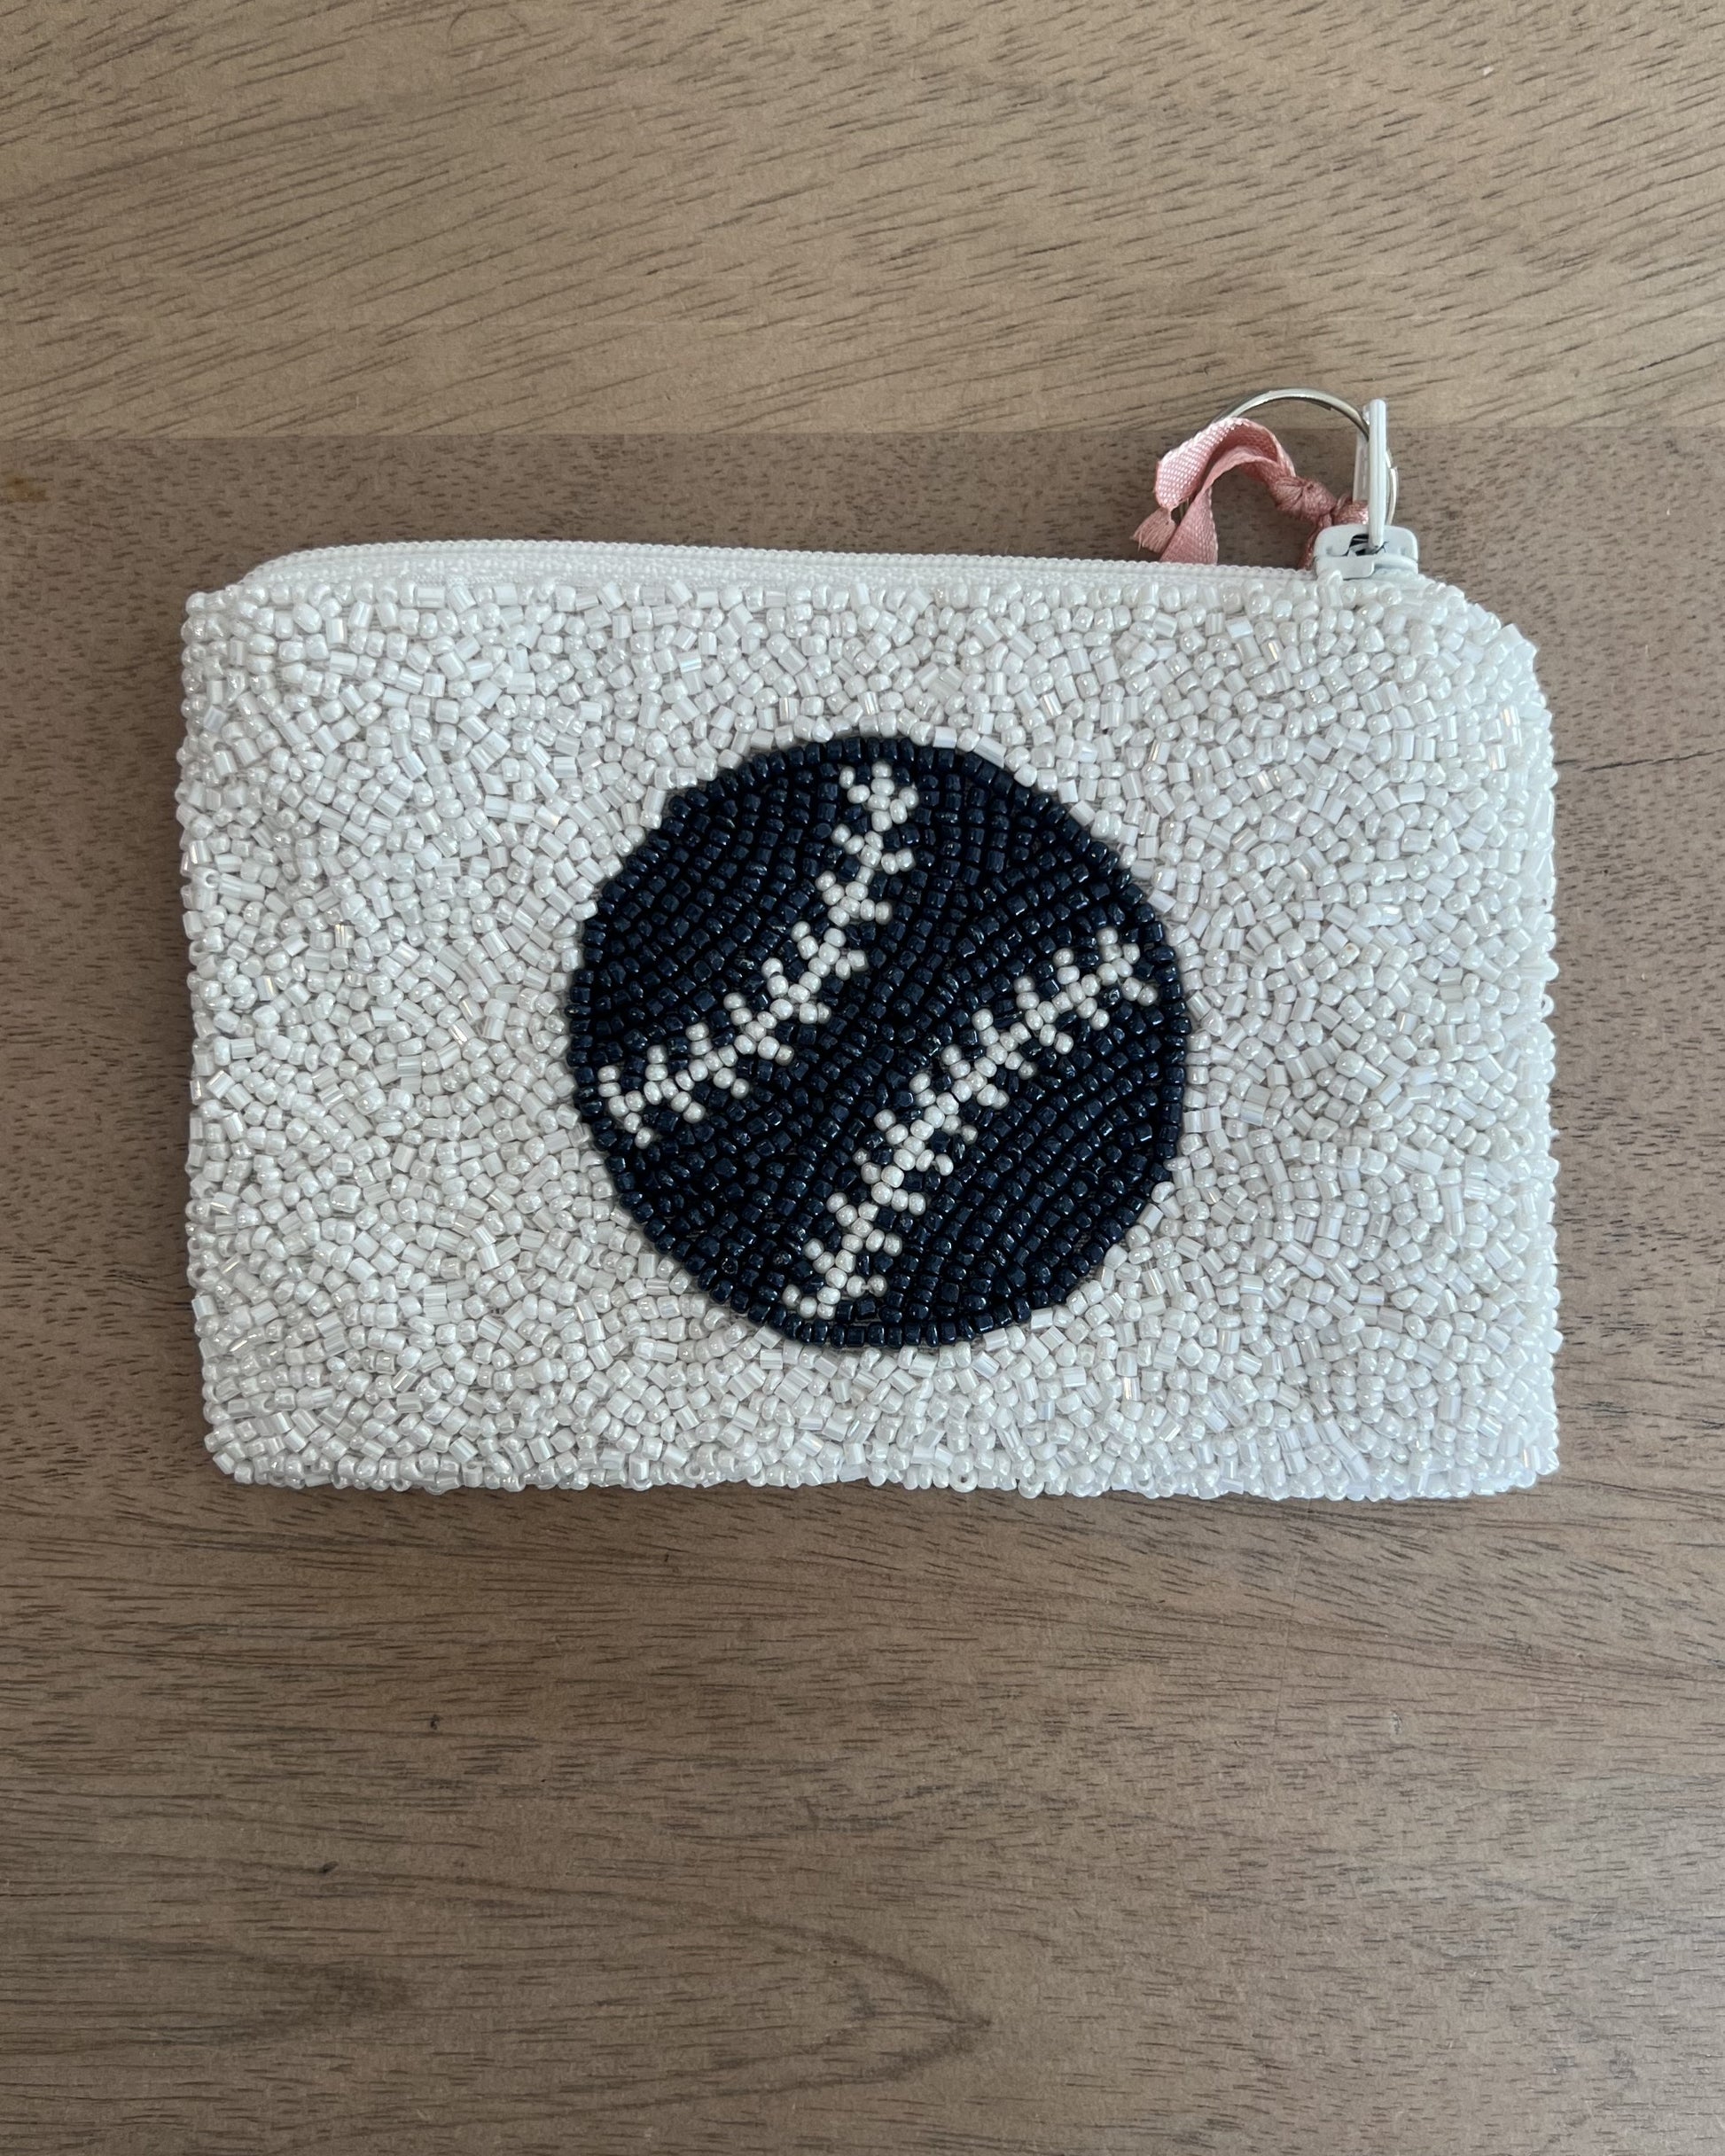 Image of Middlebury College Baseball coin purse in white/Navy on a wood background